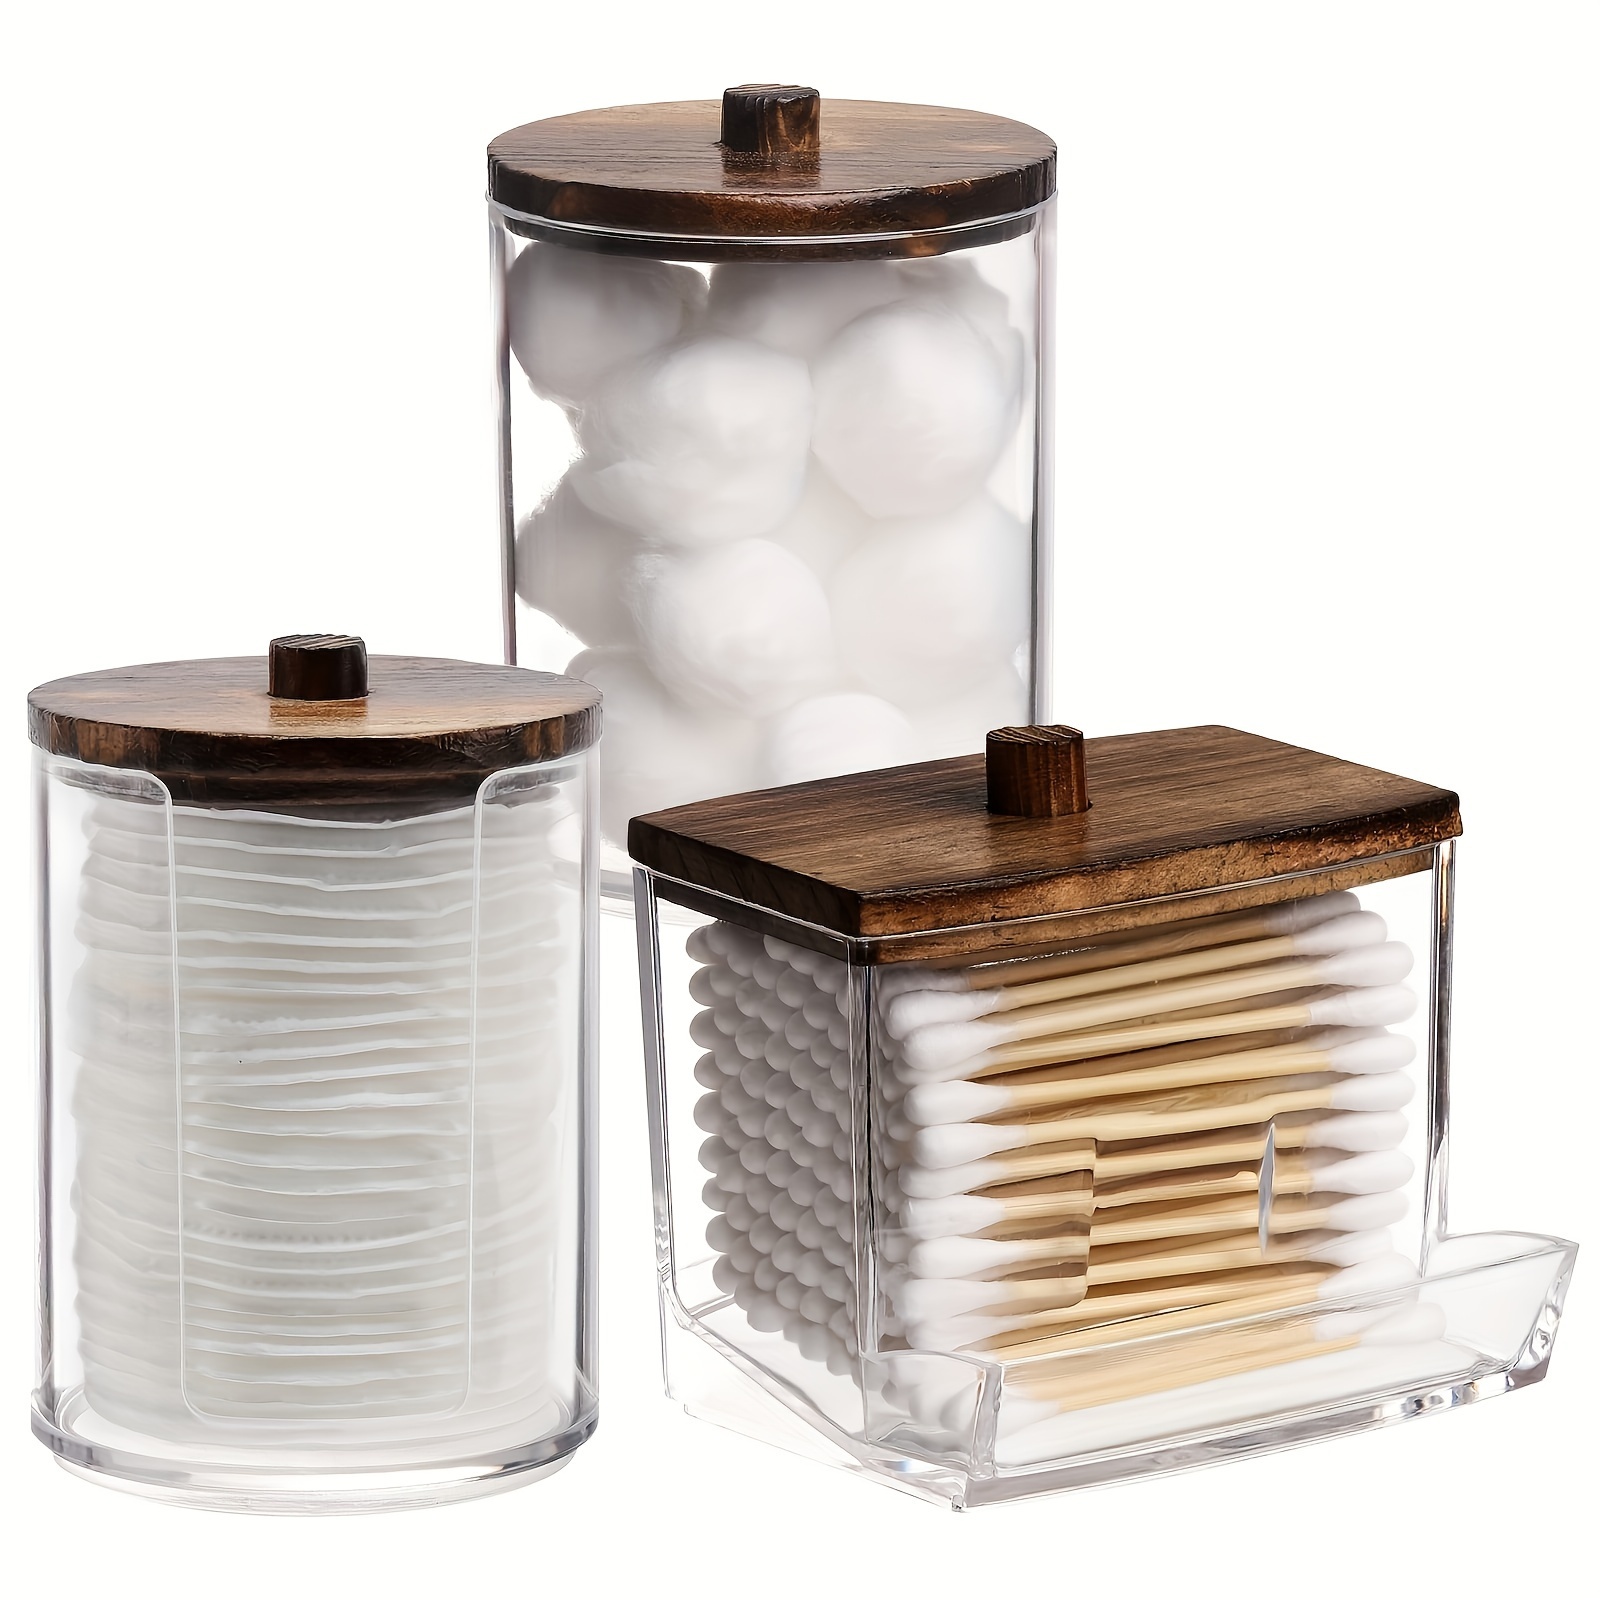 

3-piece Qtip Organizer Set: Clear Plastic And Wooden Lids For Cotton Balls, Swabs, Pads, Floss, And 7/10 Oz. Storage Jars - Perfect For Bathroom And Vanity Organization